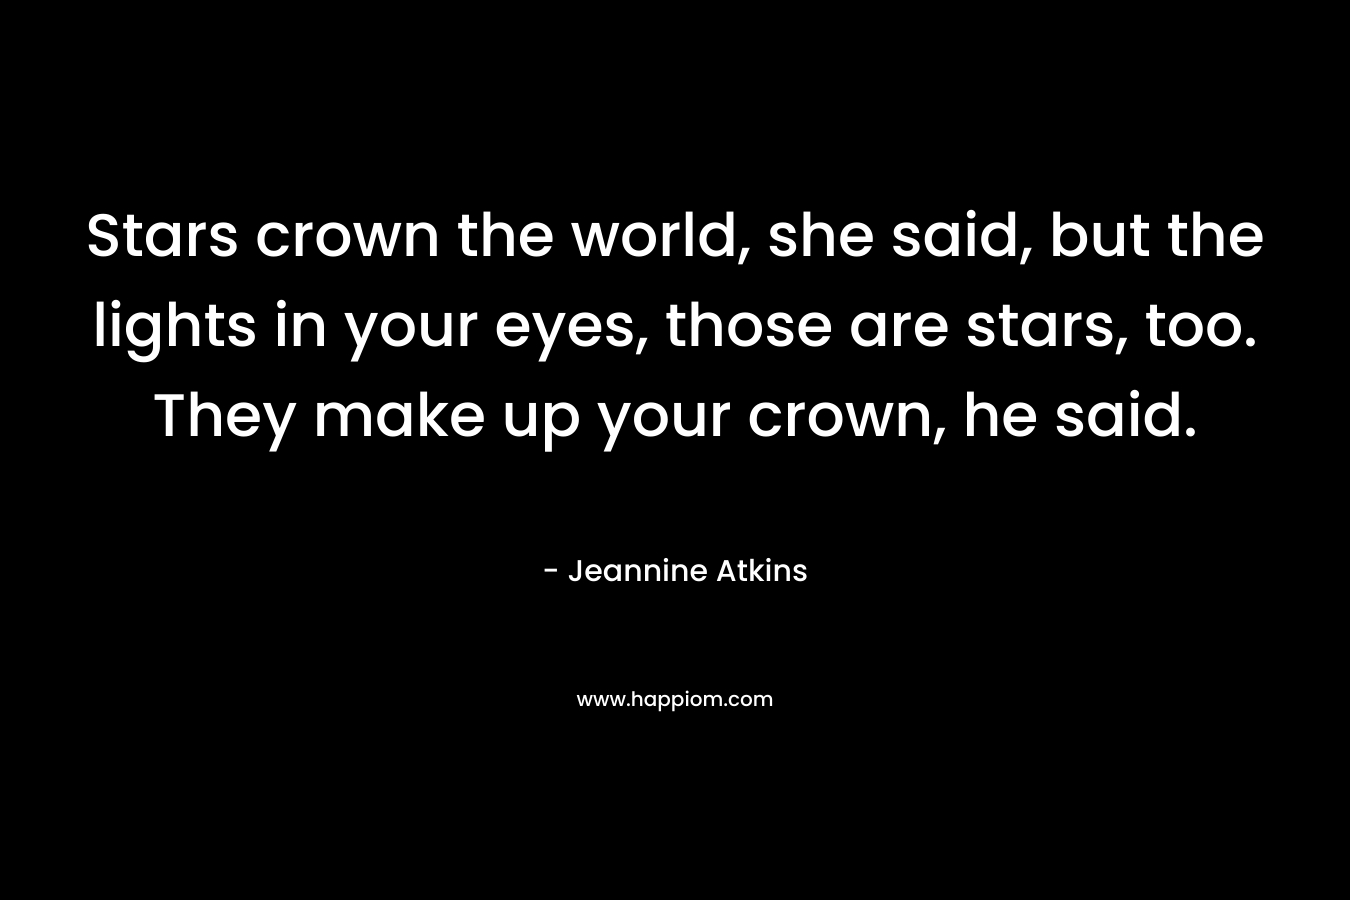 Stars crown the world, she said, but the lights in your eyes, those are stars, too. They make up your crown, he said.